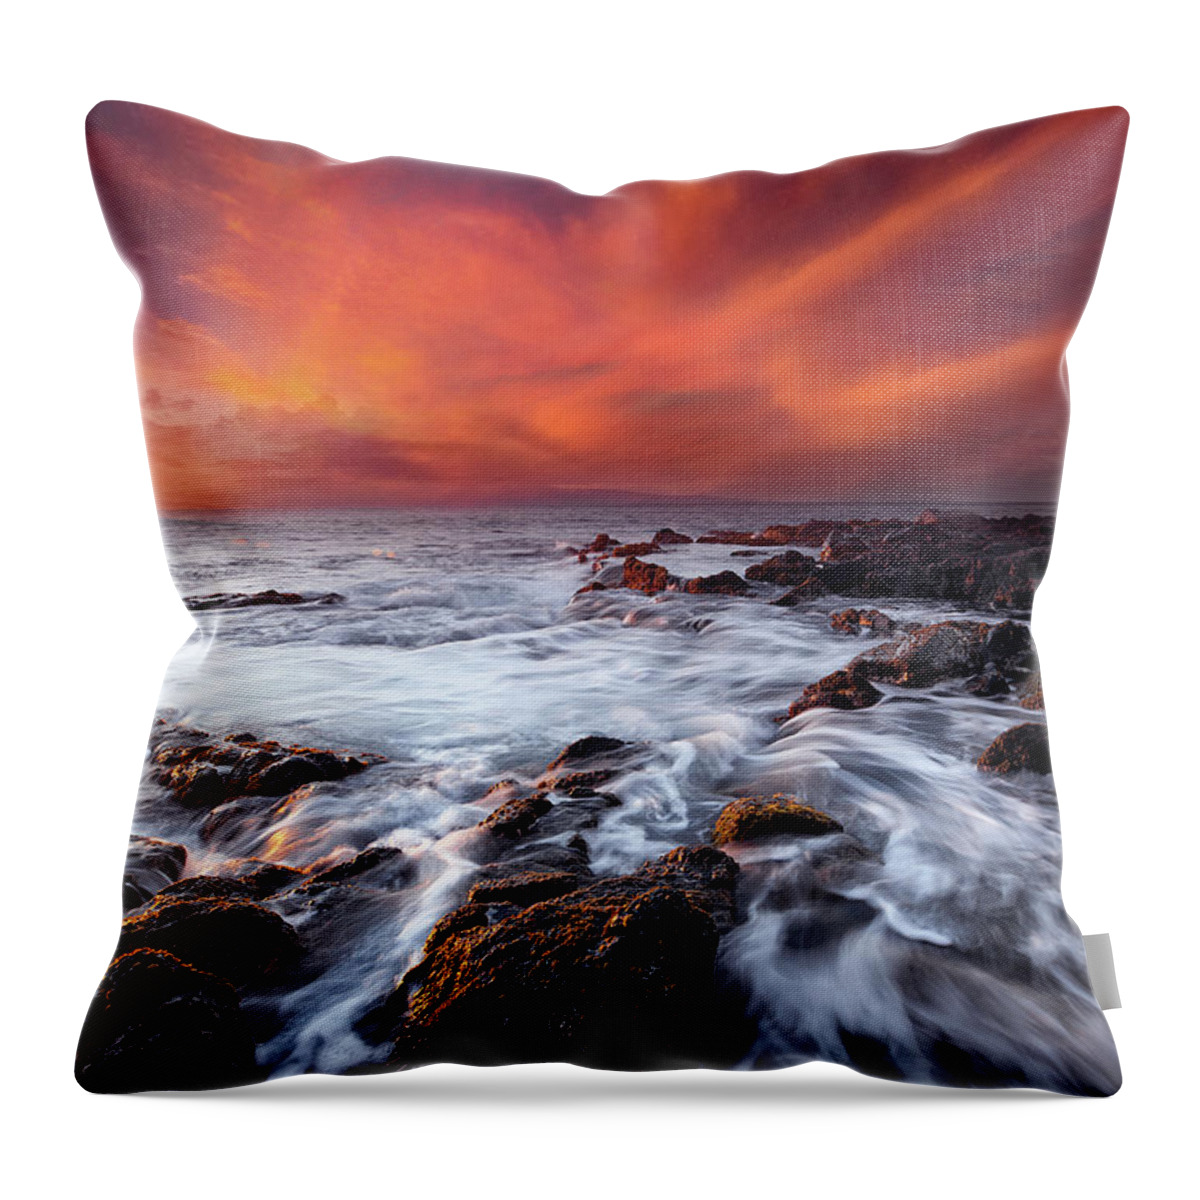 Surf Throw Pillow featuring the photograph Waterway by Micah Roemmling